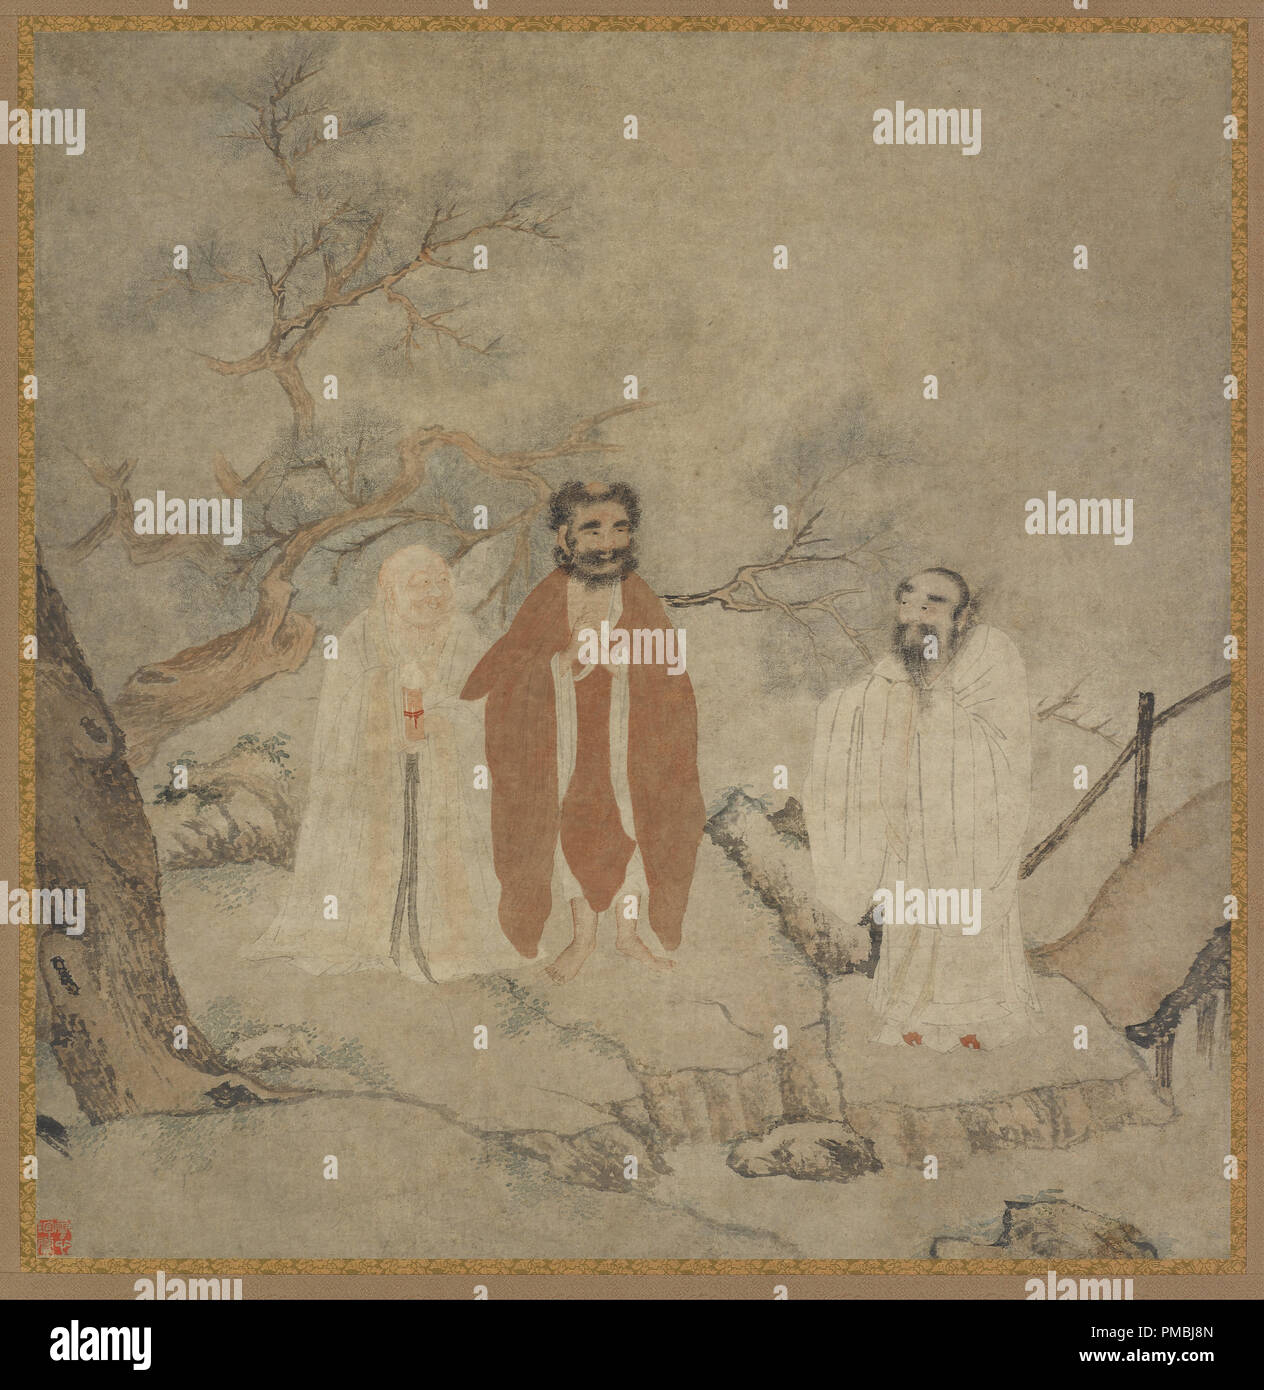 Sakyamuni, Lao Tzu, and Confucius. Date/Period: From 1368 until 1644. Painting. Ink and color on paper. Height: 1,515 mm (59.64 in); Width: 800 mm (31.49 in). Author: UNKNOWN. Chinese Master. Stock Photo